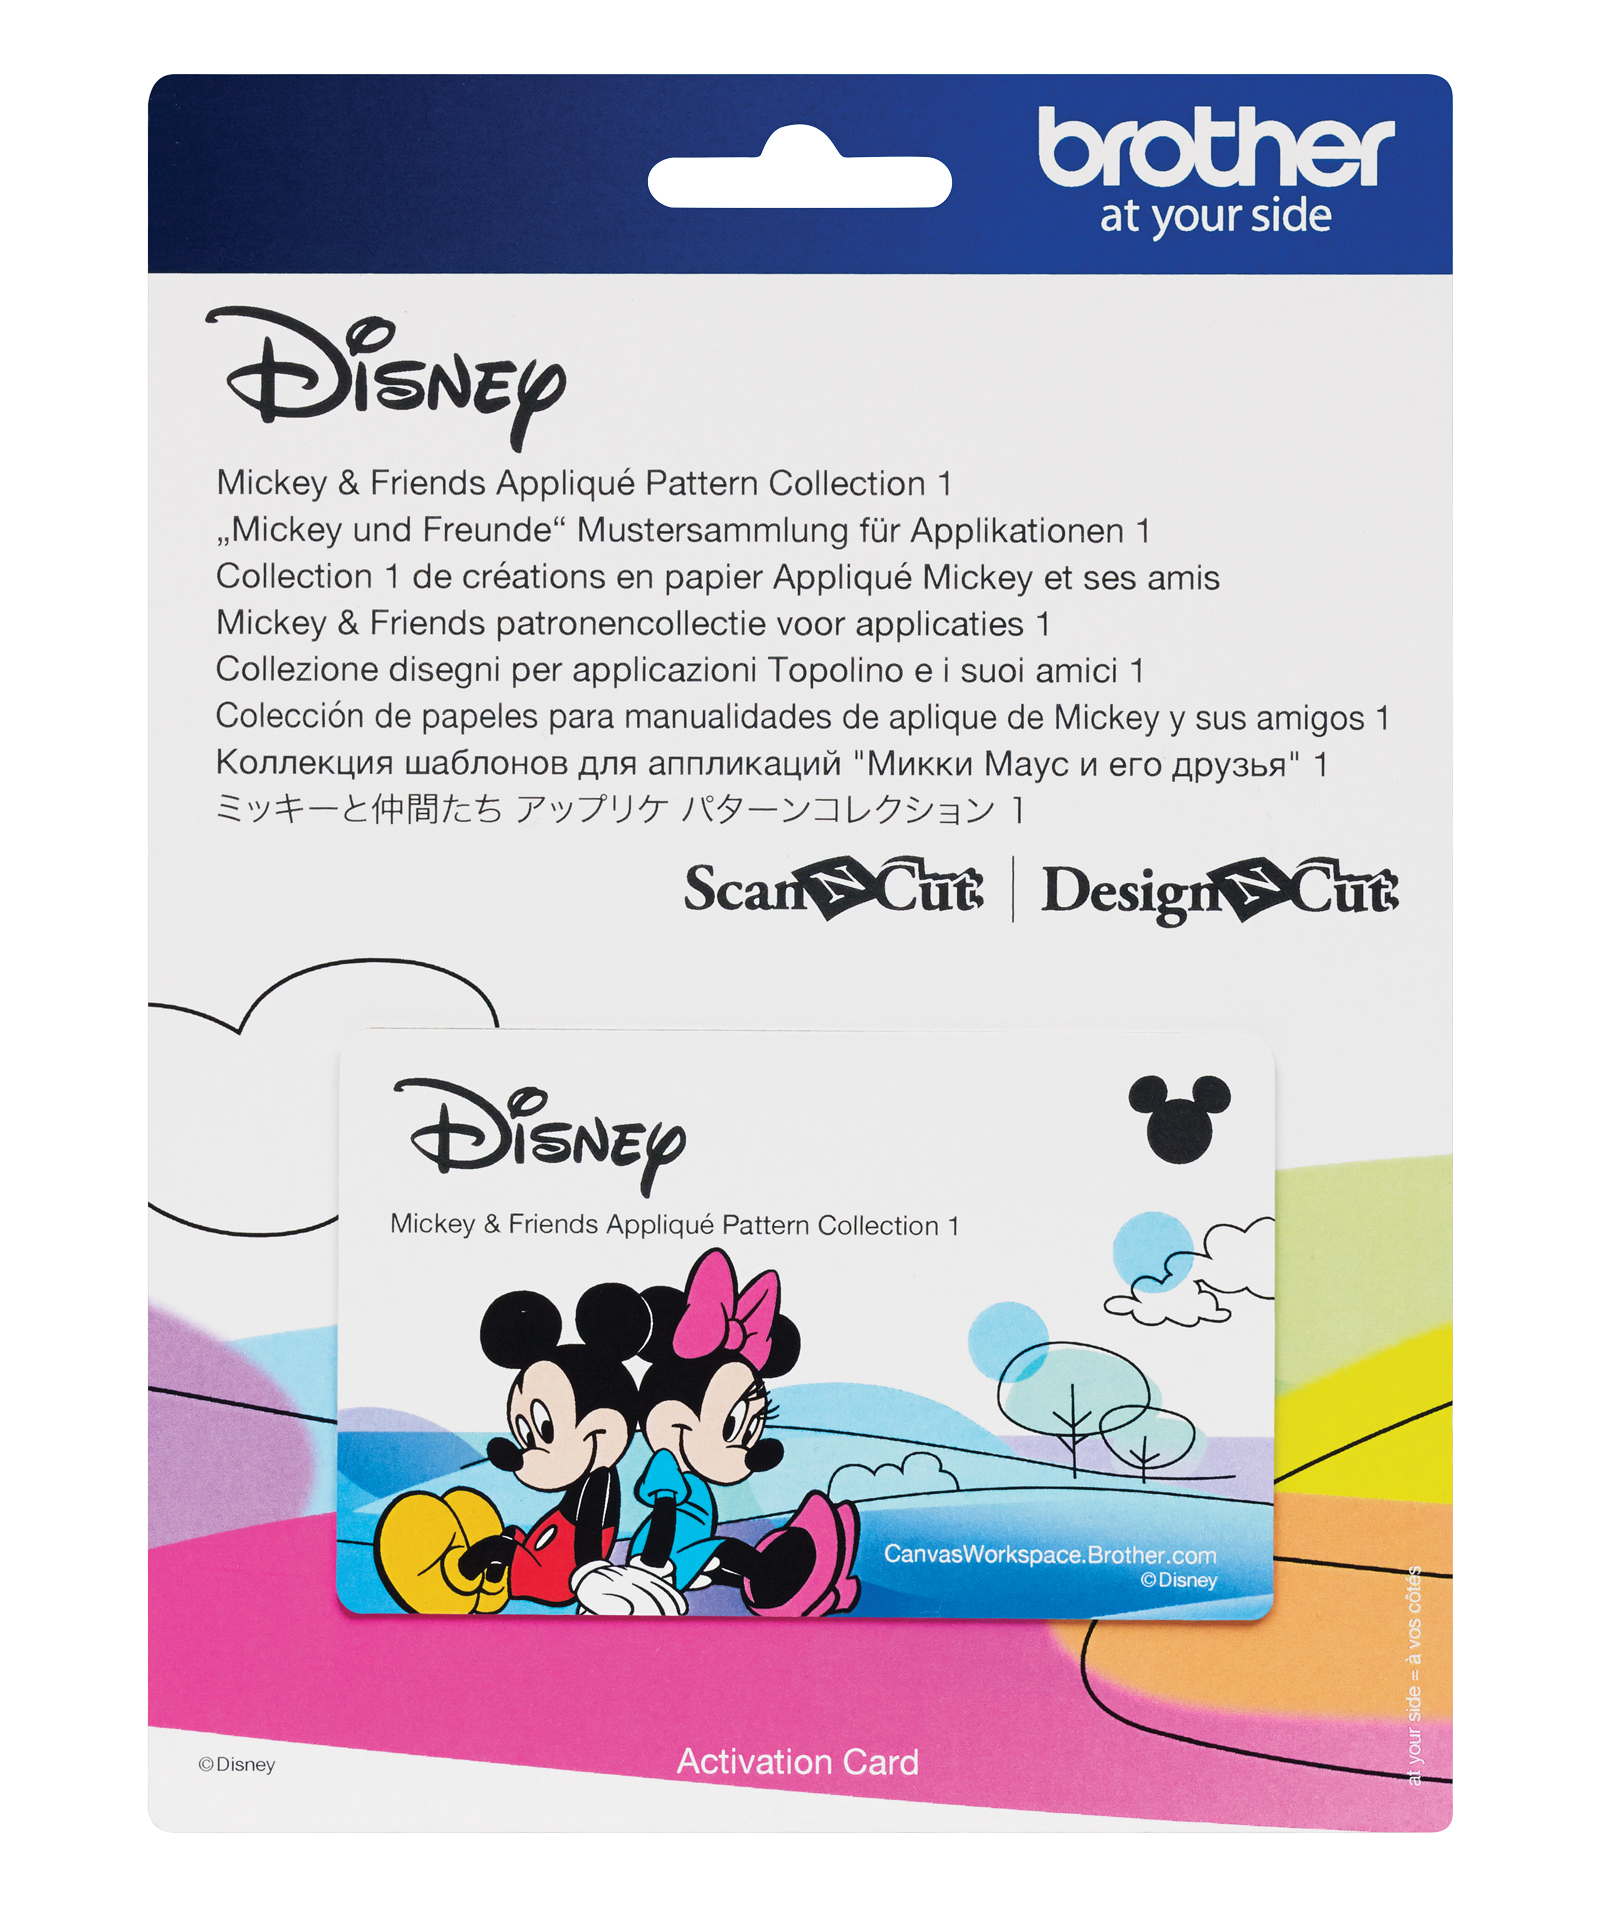 Disney Embroidery Patterns Disney Mickey And Friends Appliqu Pattern Collection 1 Brother